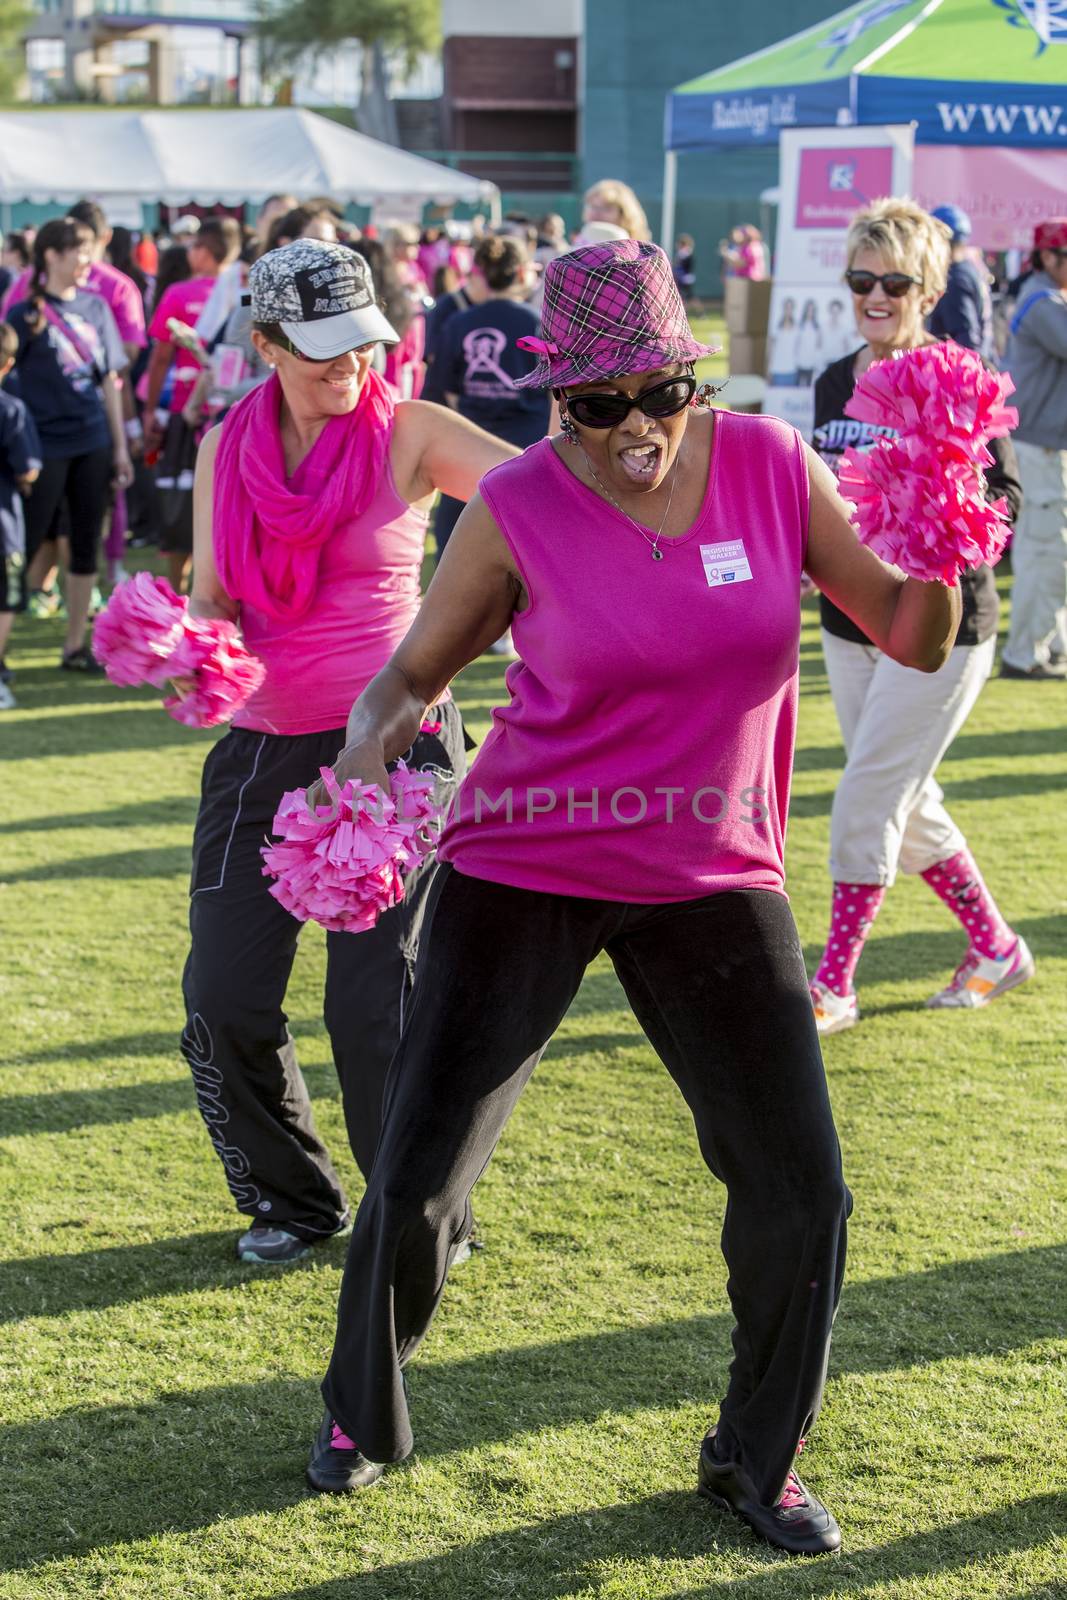 TUCSON, PIMA COUNTY, ARIZONA, USA - OCTOBER 18:  Unidentified women dancing before the 2015 American Cancer Society Making Strides Against Breast Cancer walk, on October 18, 2015 in Tucson, Arizona, USA.